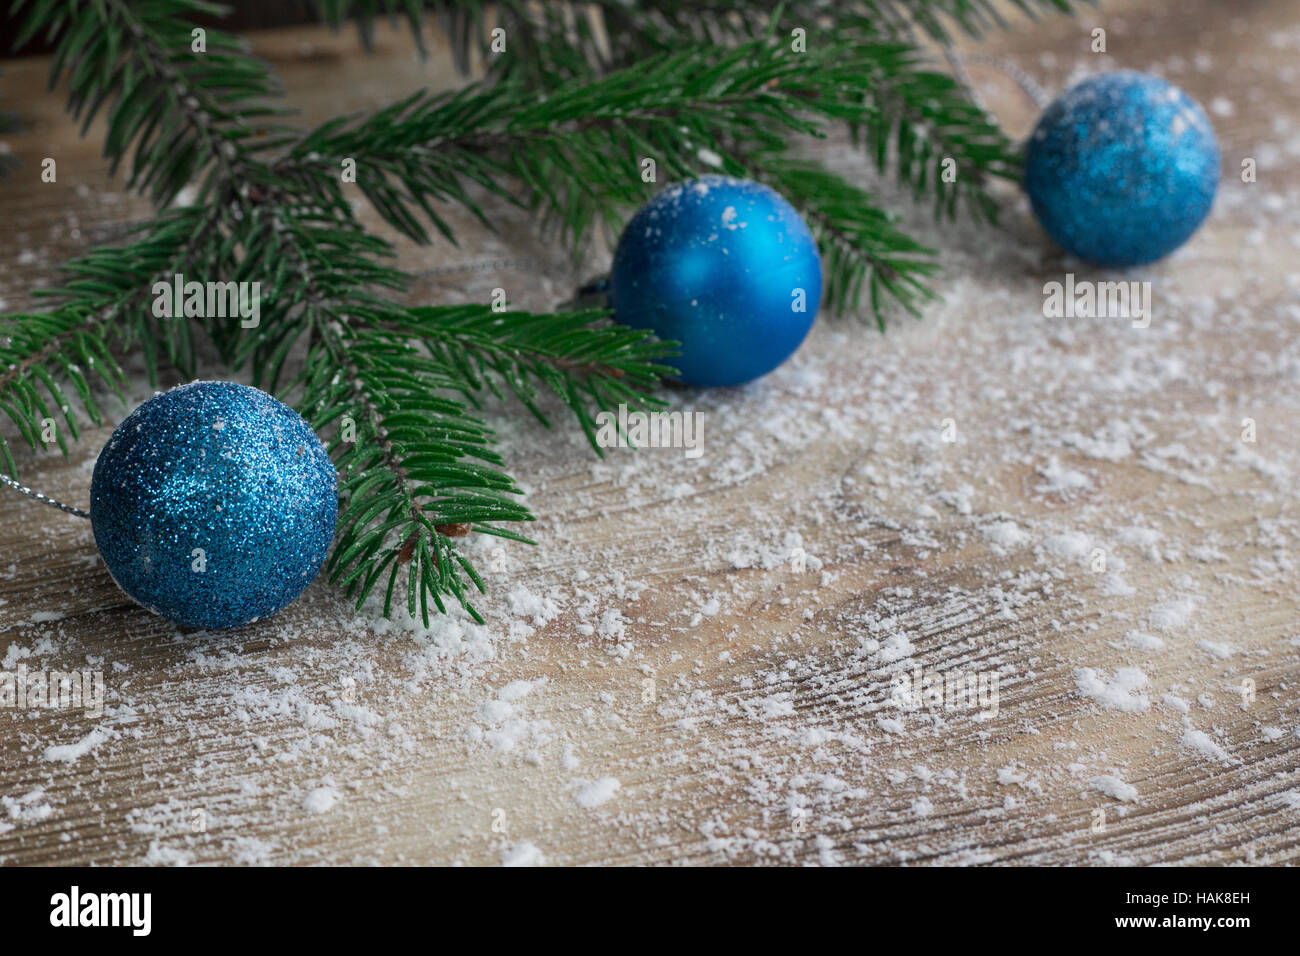 Christmas and New Year winter holiday snowbound wooden space background with green fir tree branches and blue ball ornament Stock Photo